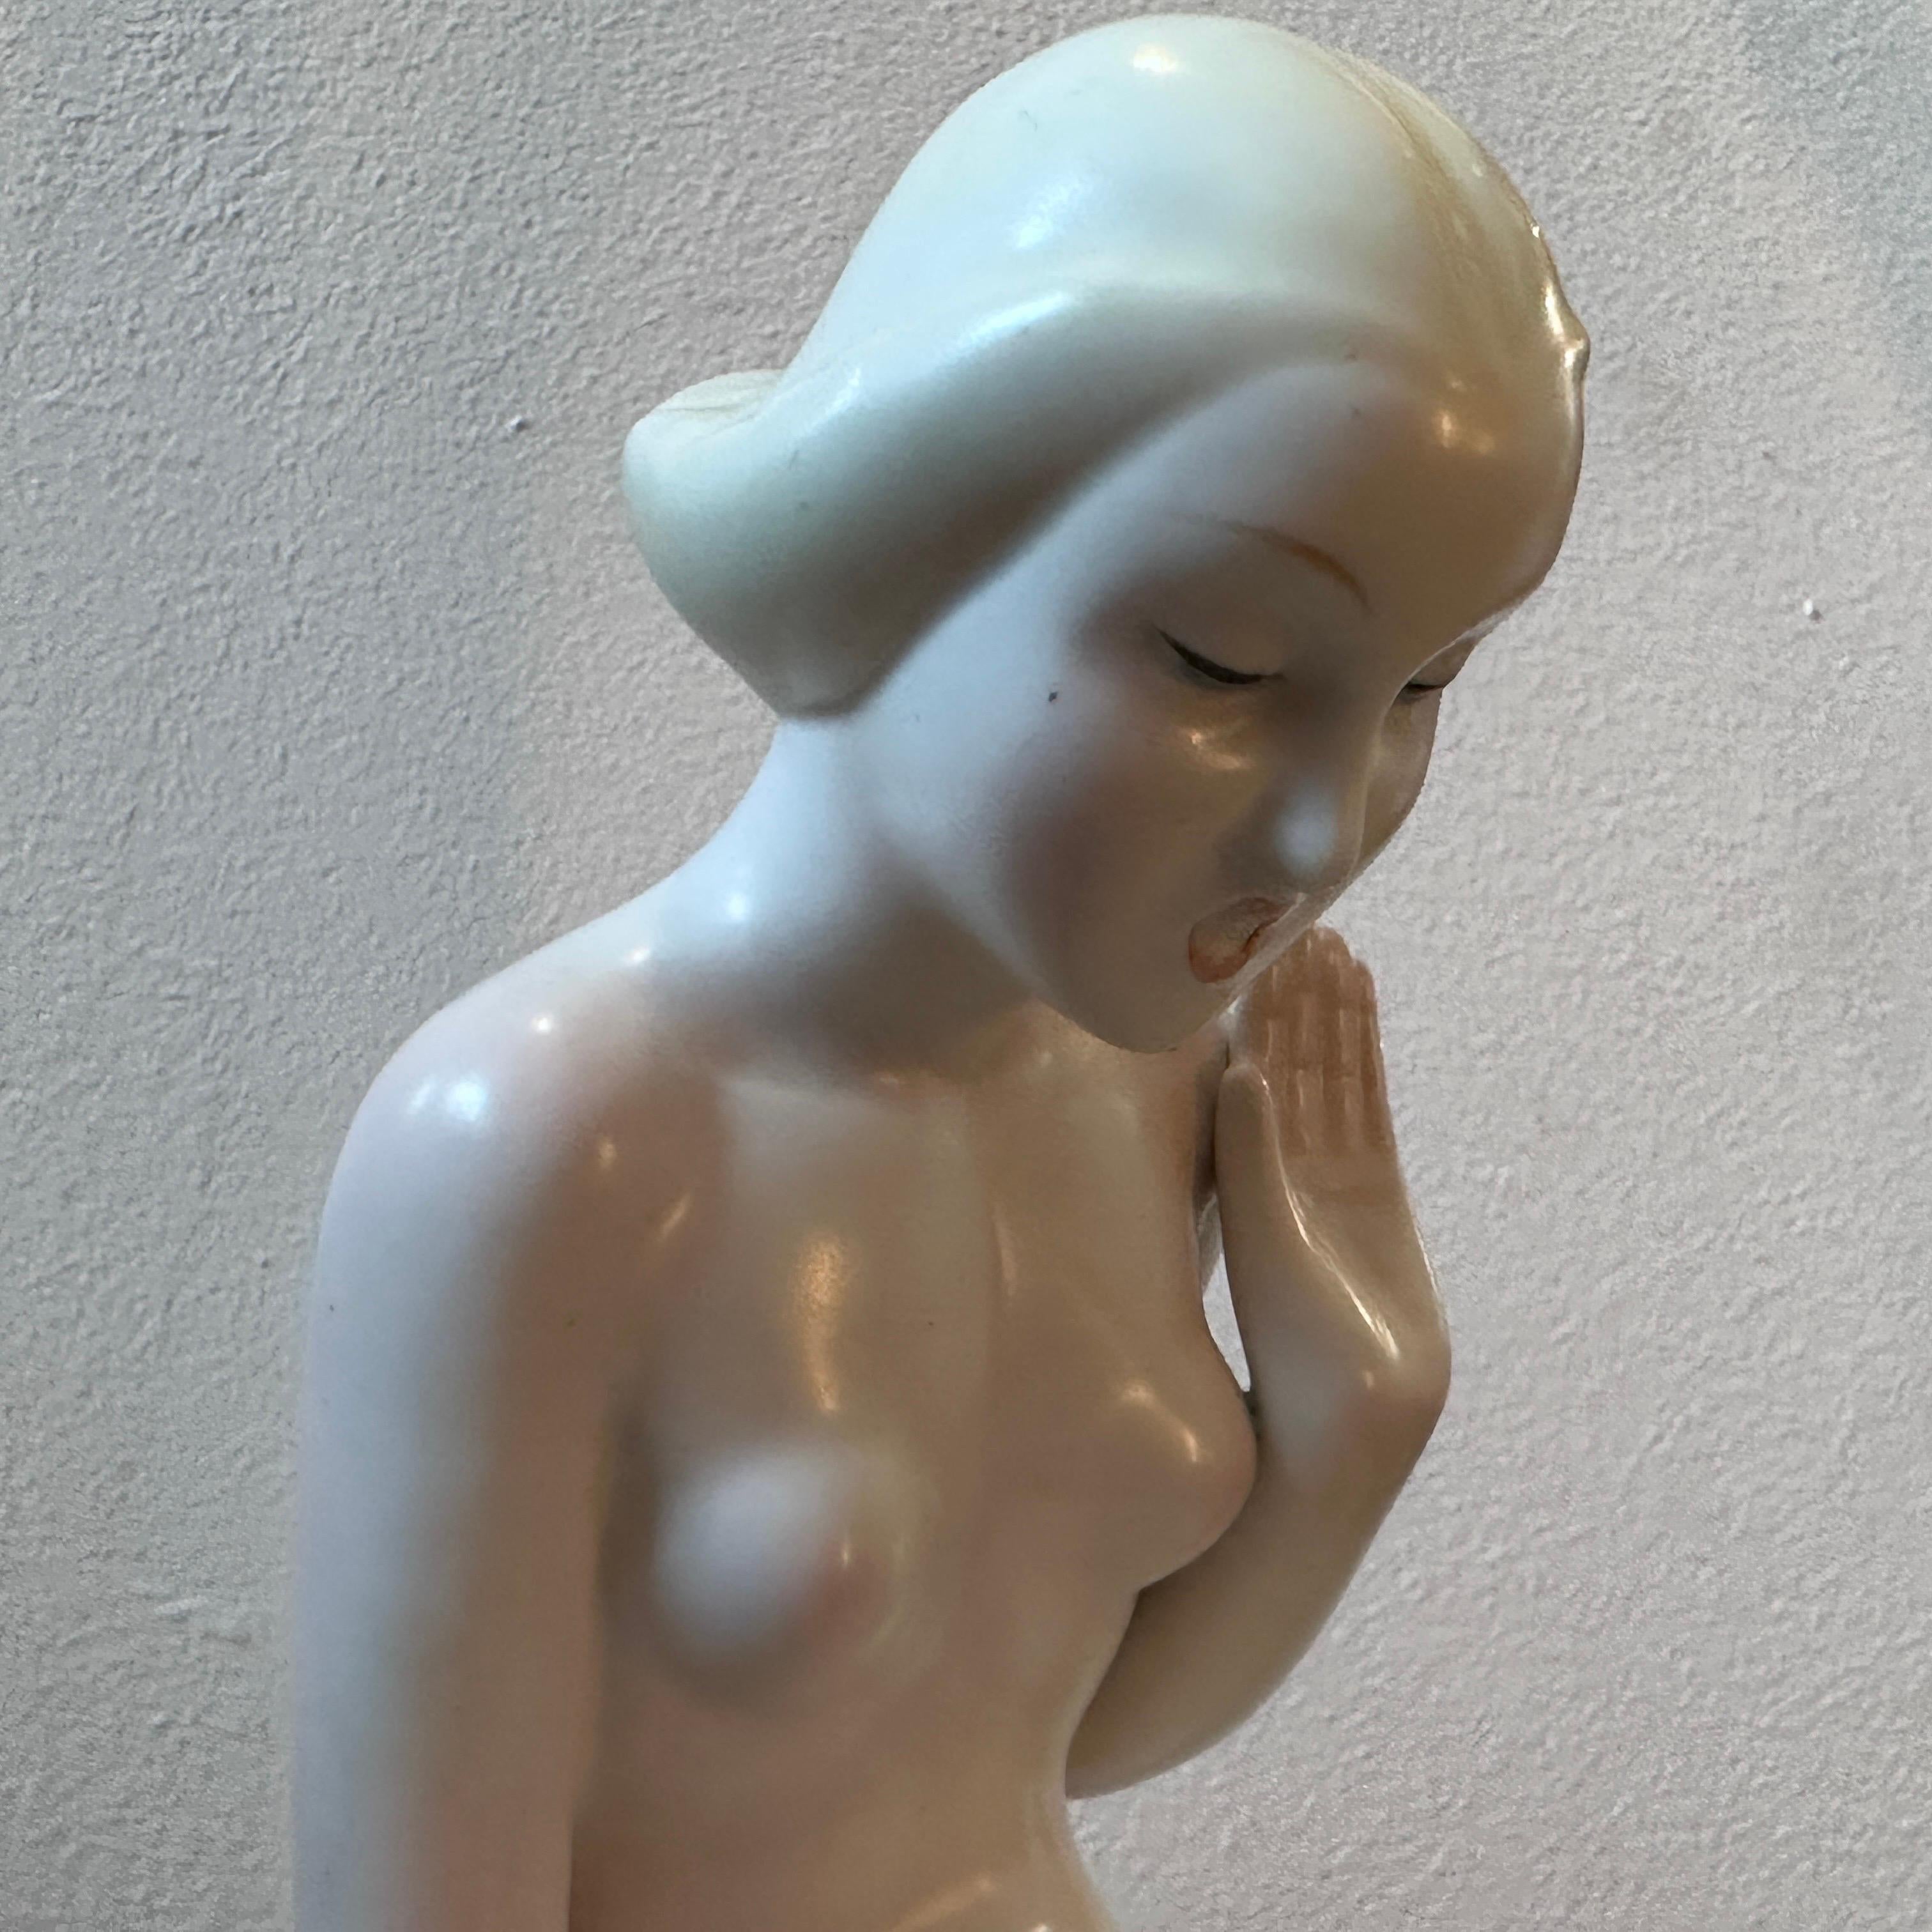 Italian 1940s Art Deco Porcelain Figure of a Woman on a Flower by Giovanni Ronzan For Sale